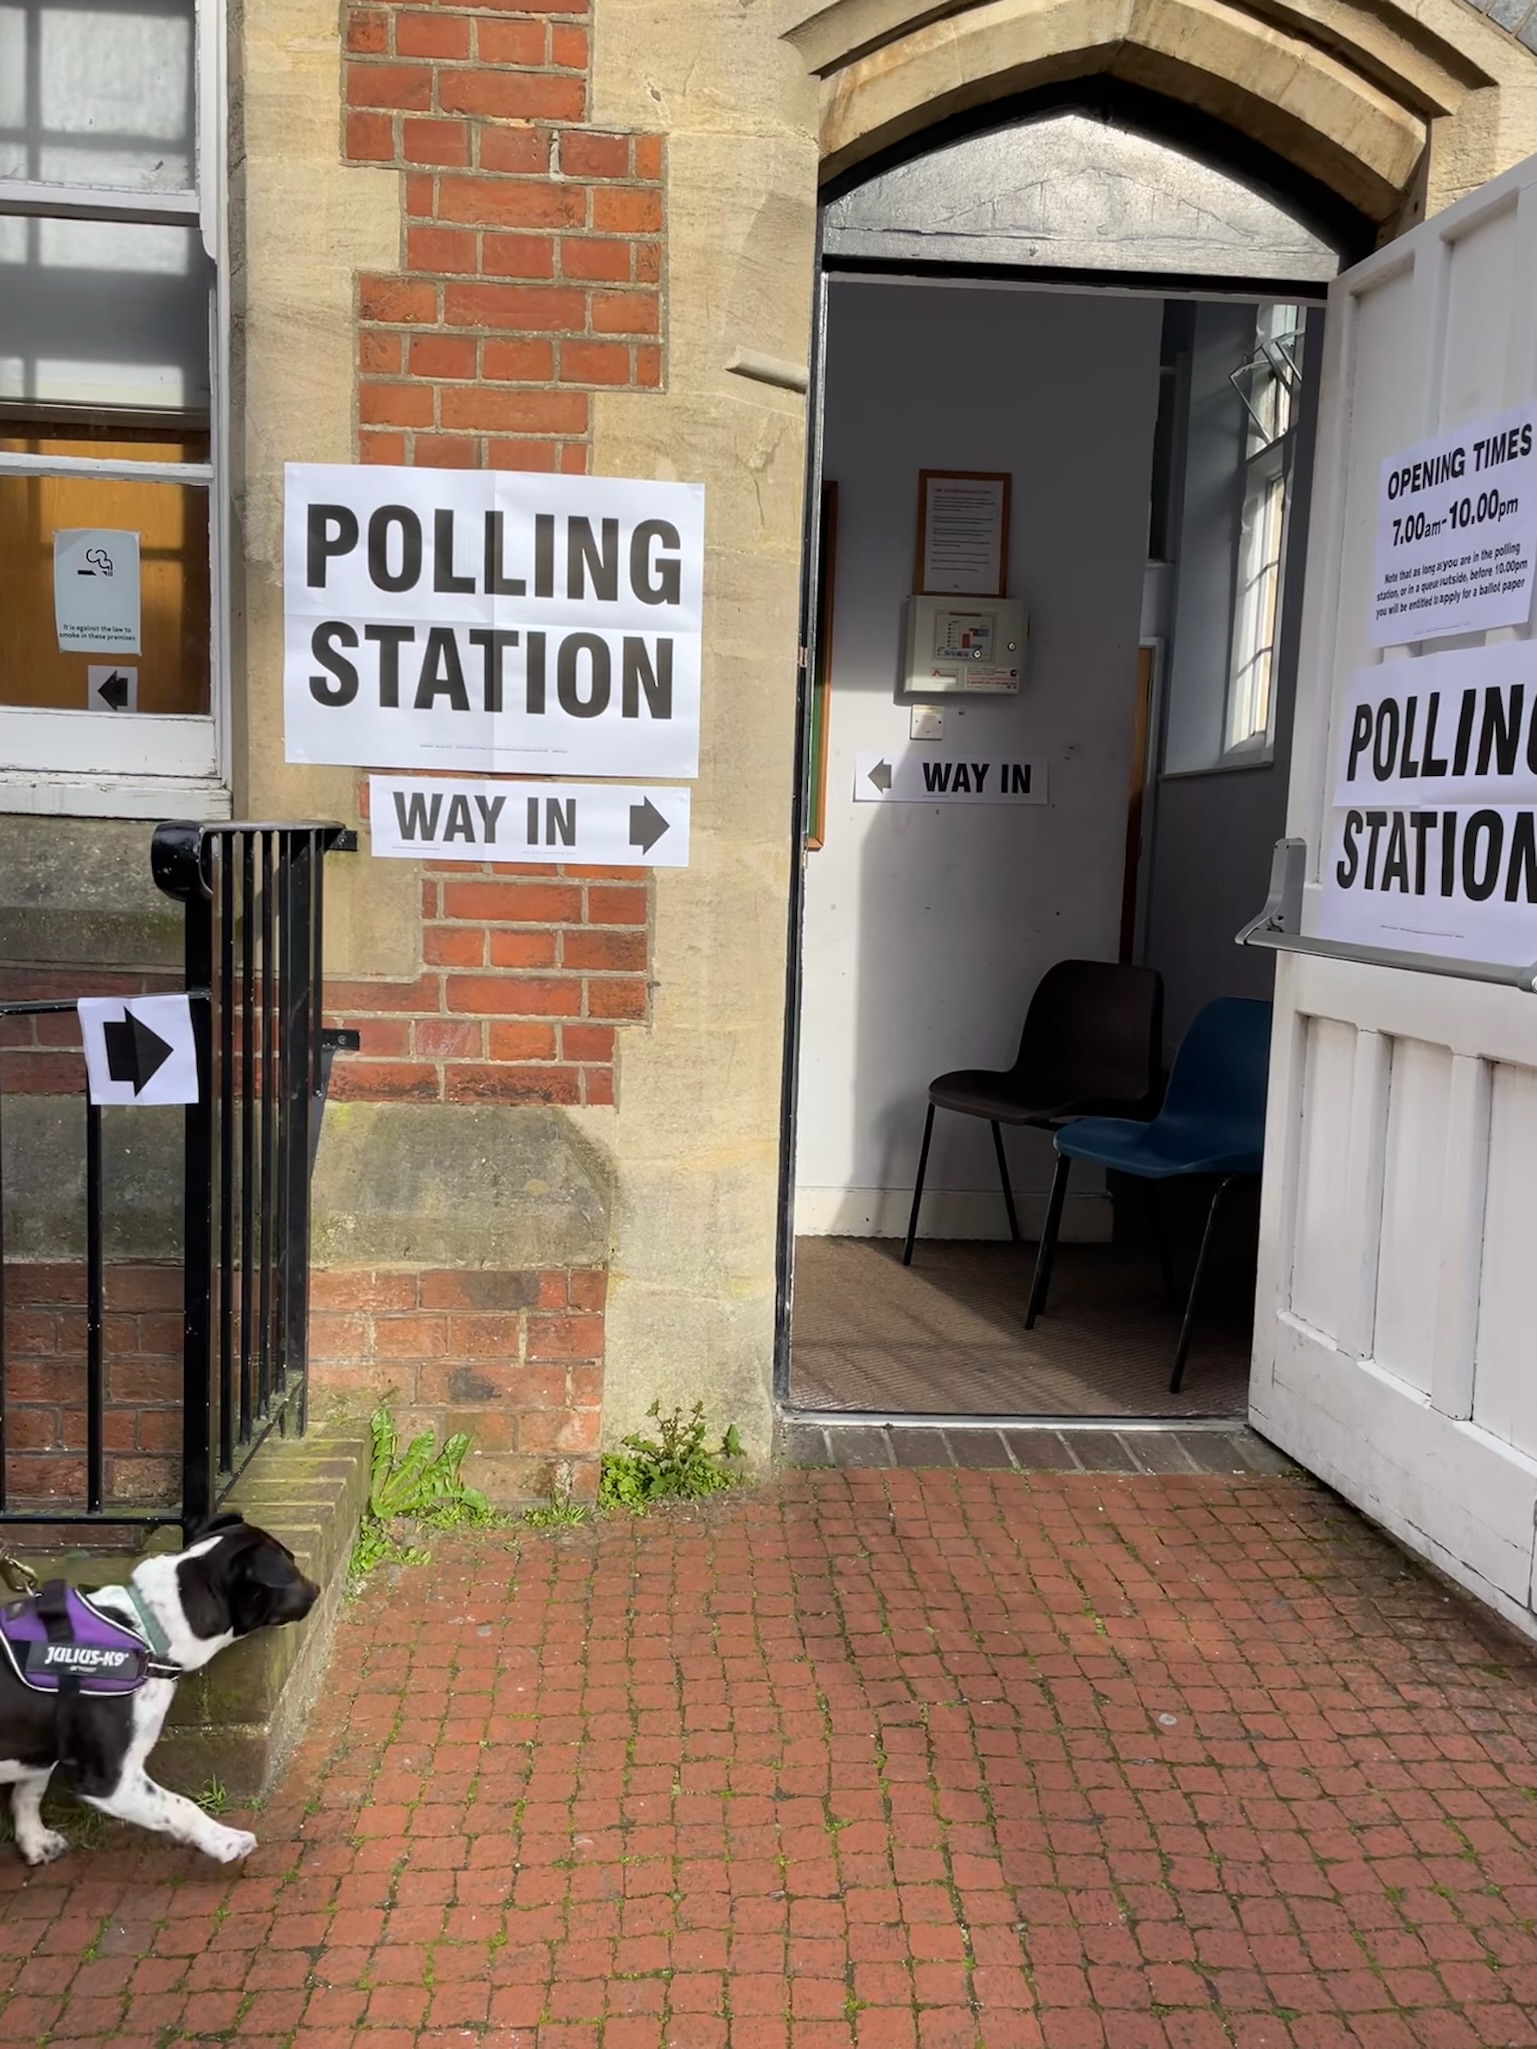 My first visit to a Polling Station